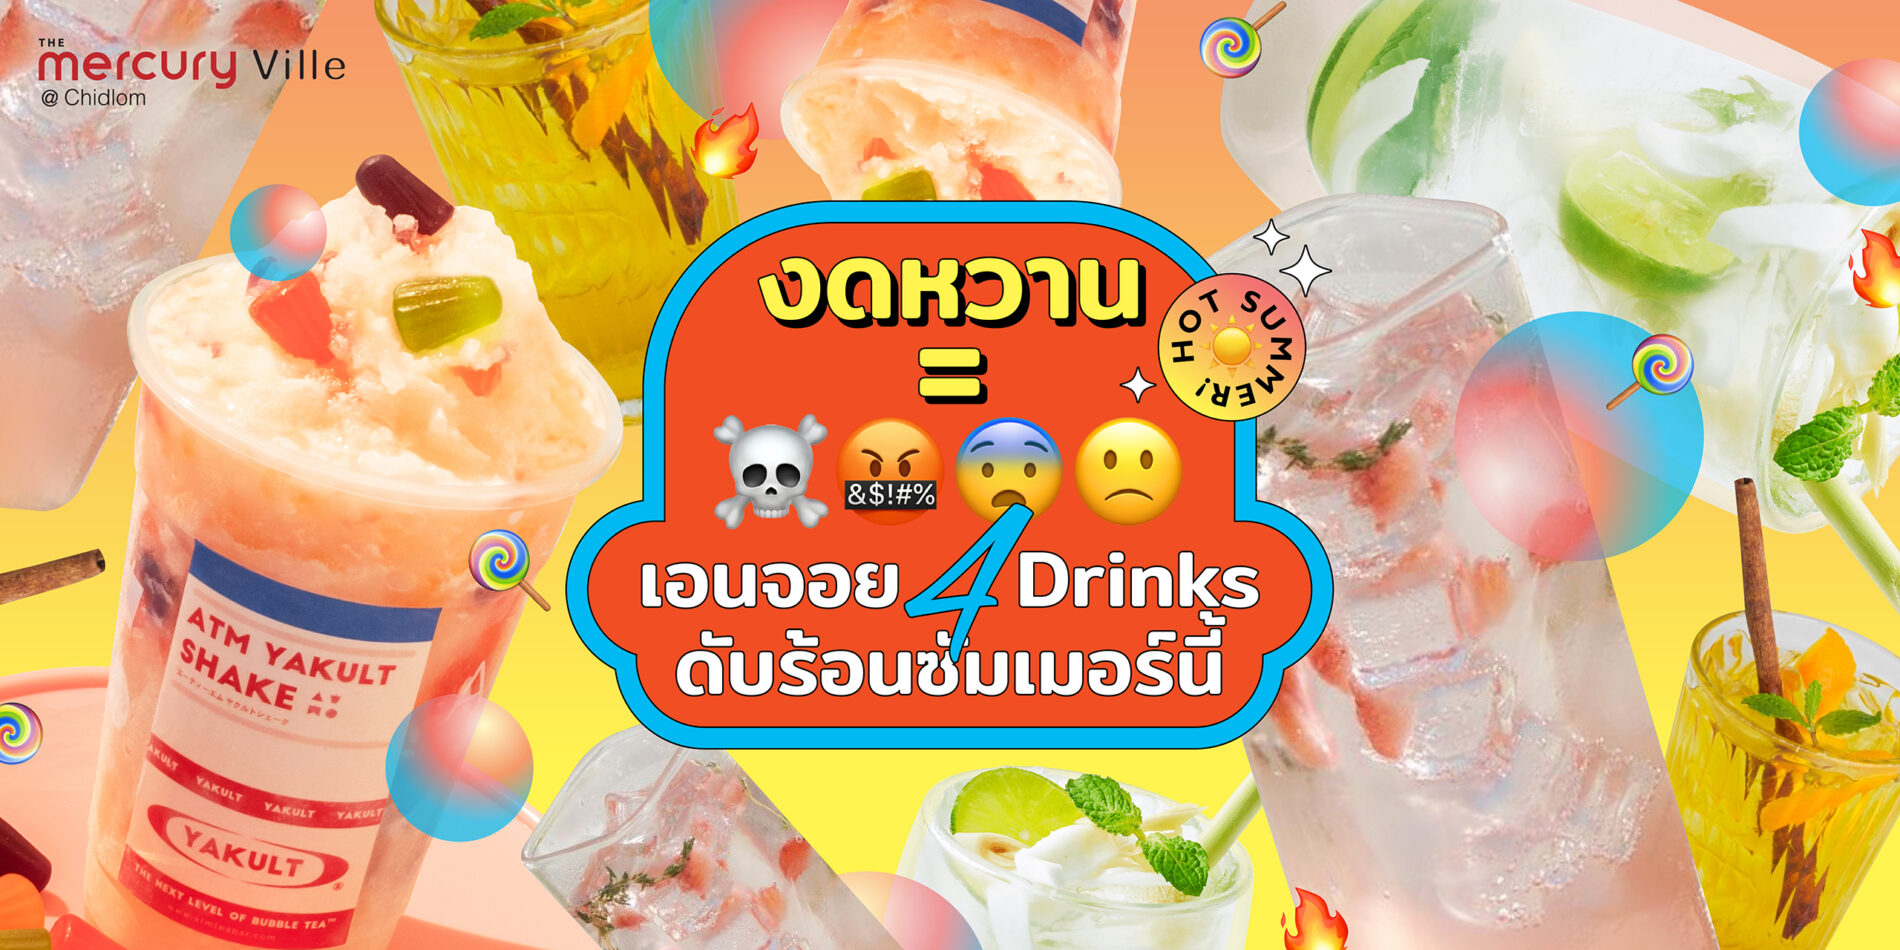 4 Drinks to Enjoy during Bangkok's Sweltering Summer at The Mercury Ville @ Chidlom